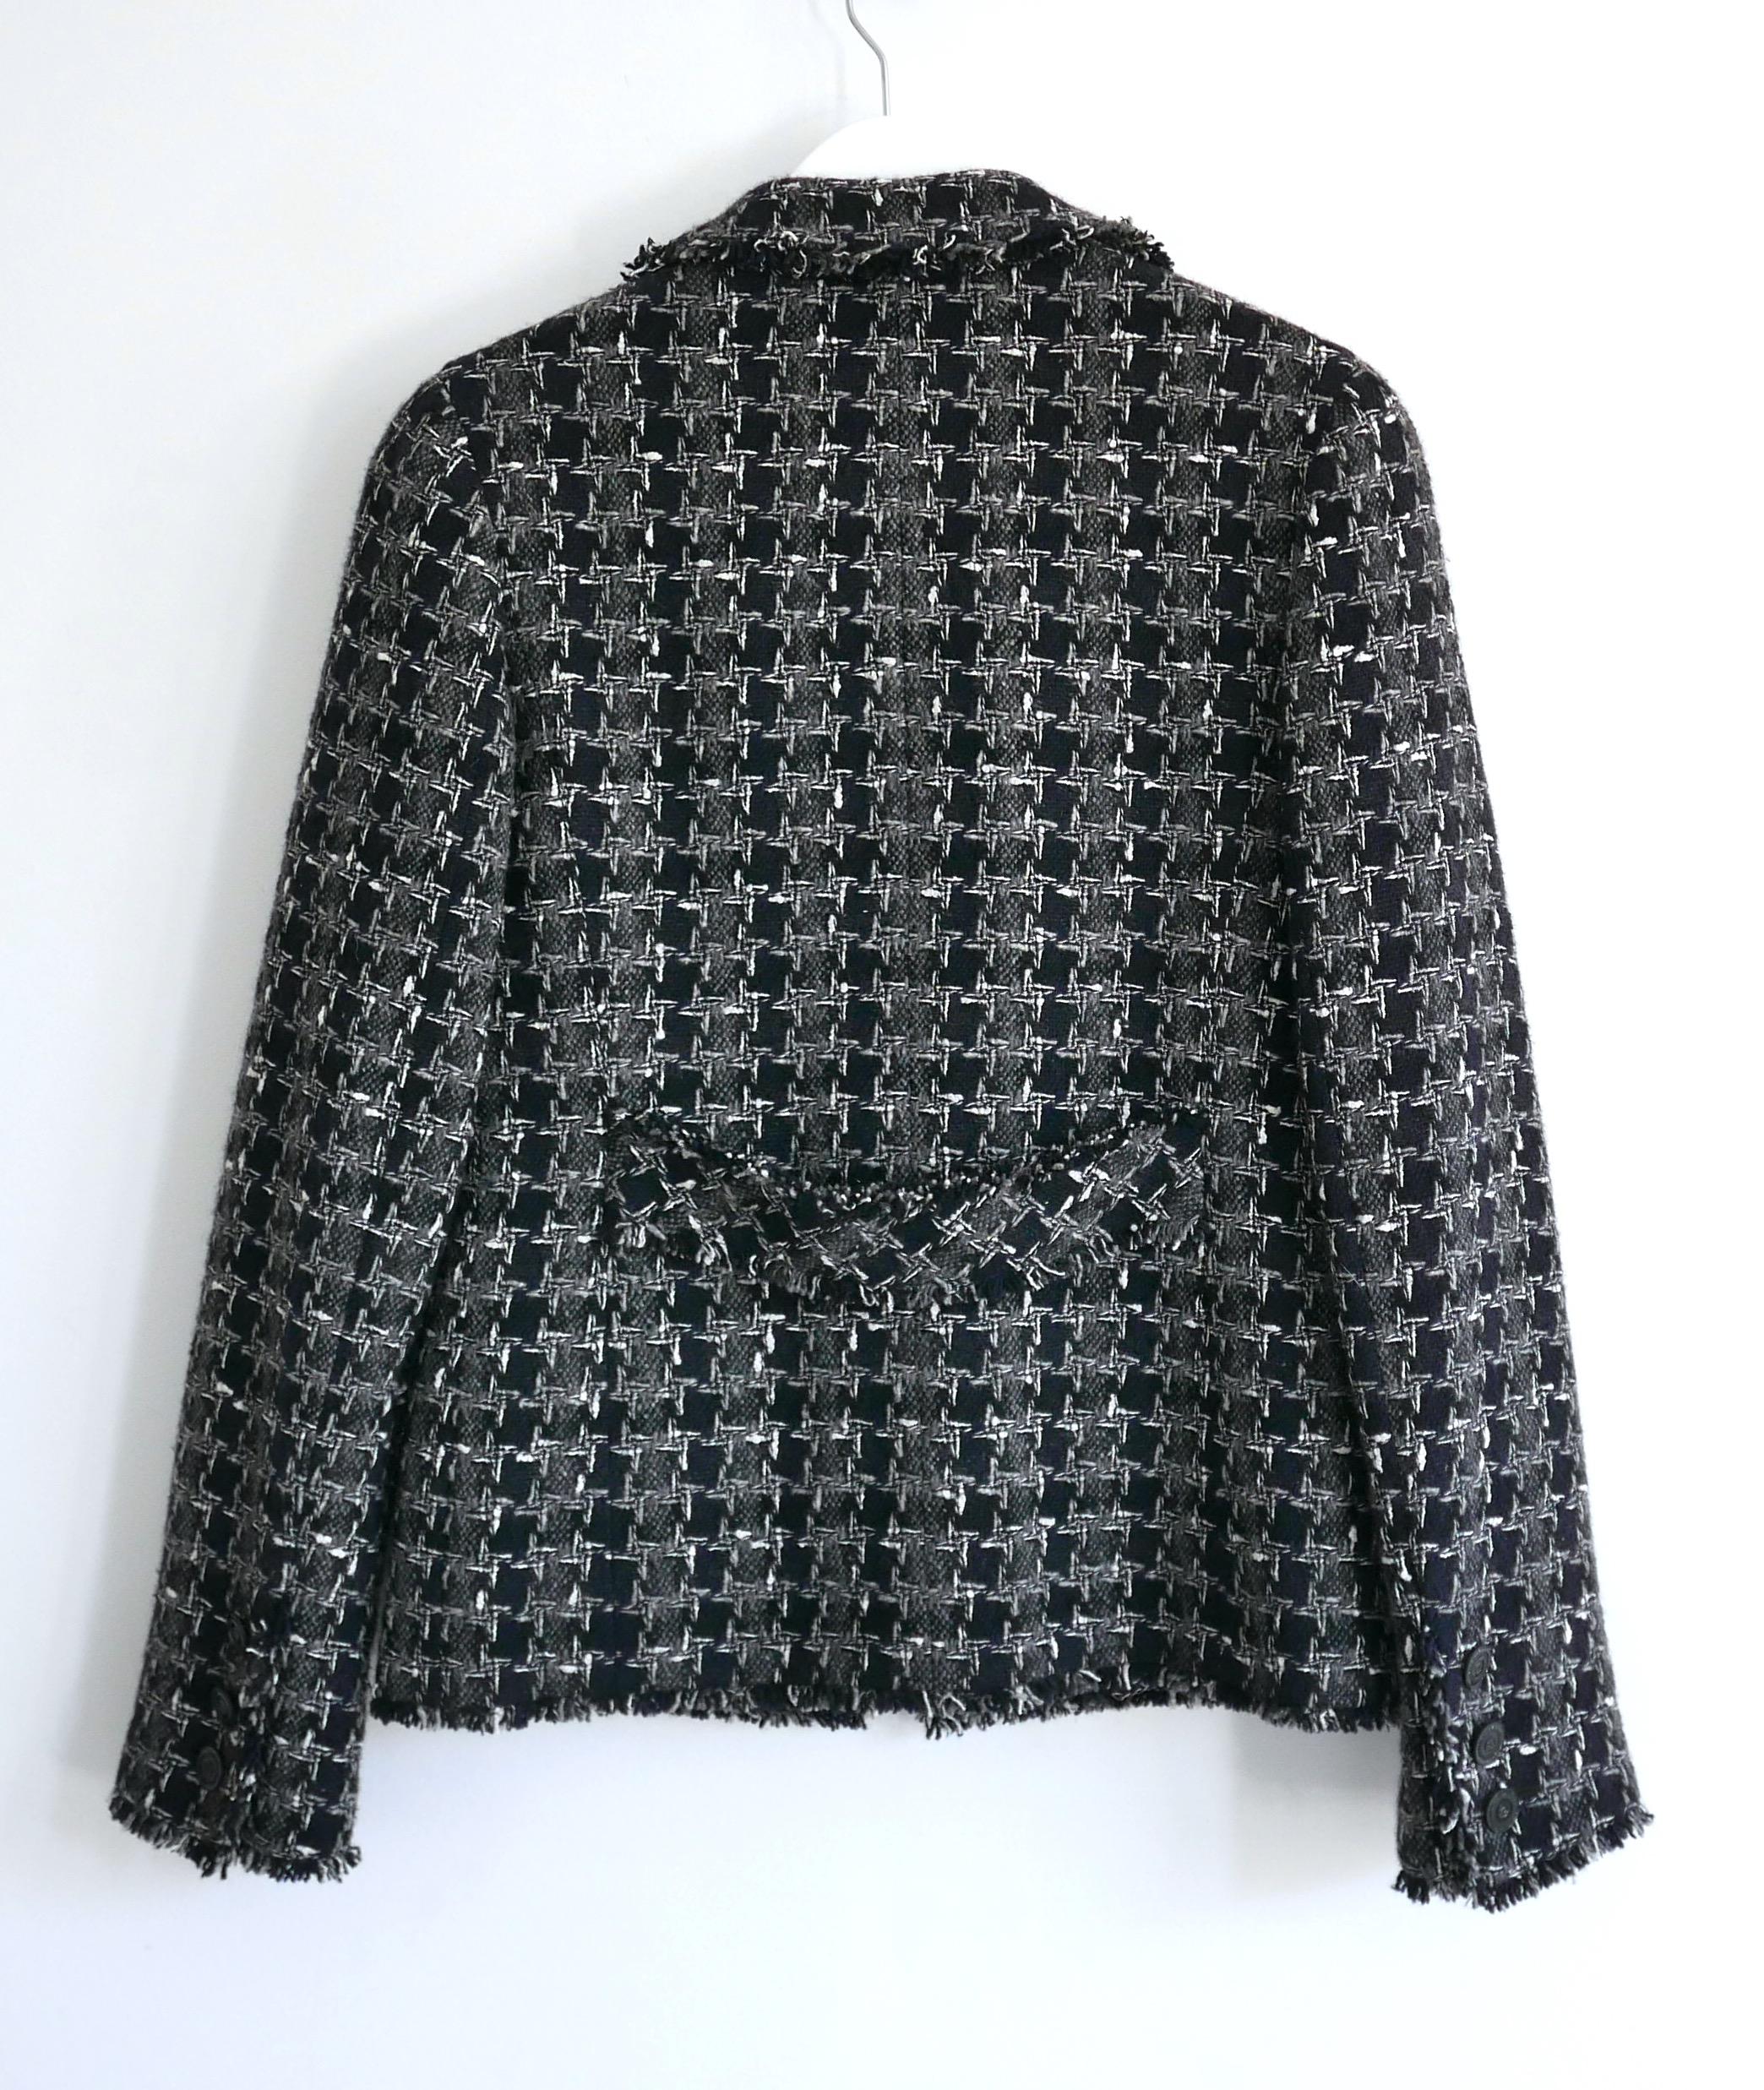 Chanel Fall 2007 07A Cashmere Houndstooth Tweed Jacket In New Condition For Sale In London, GB